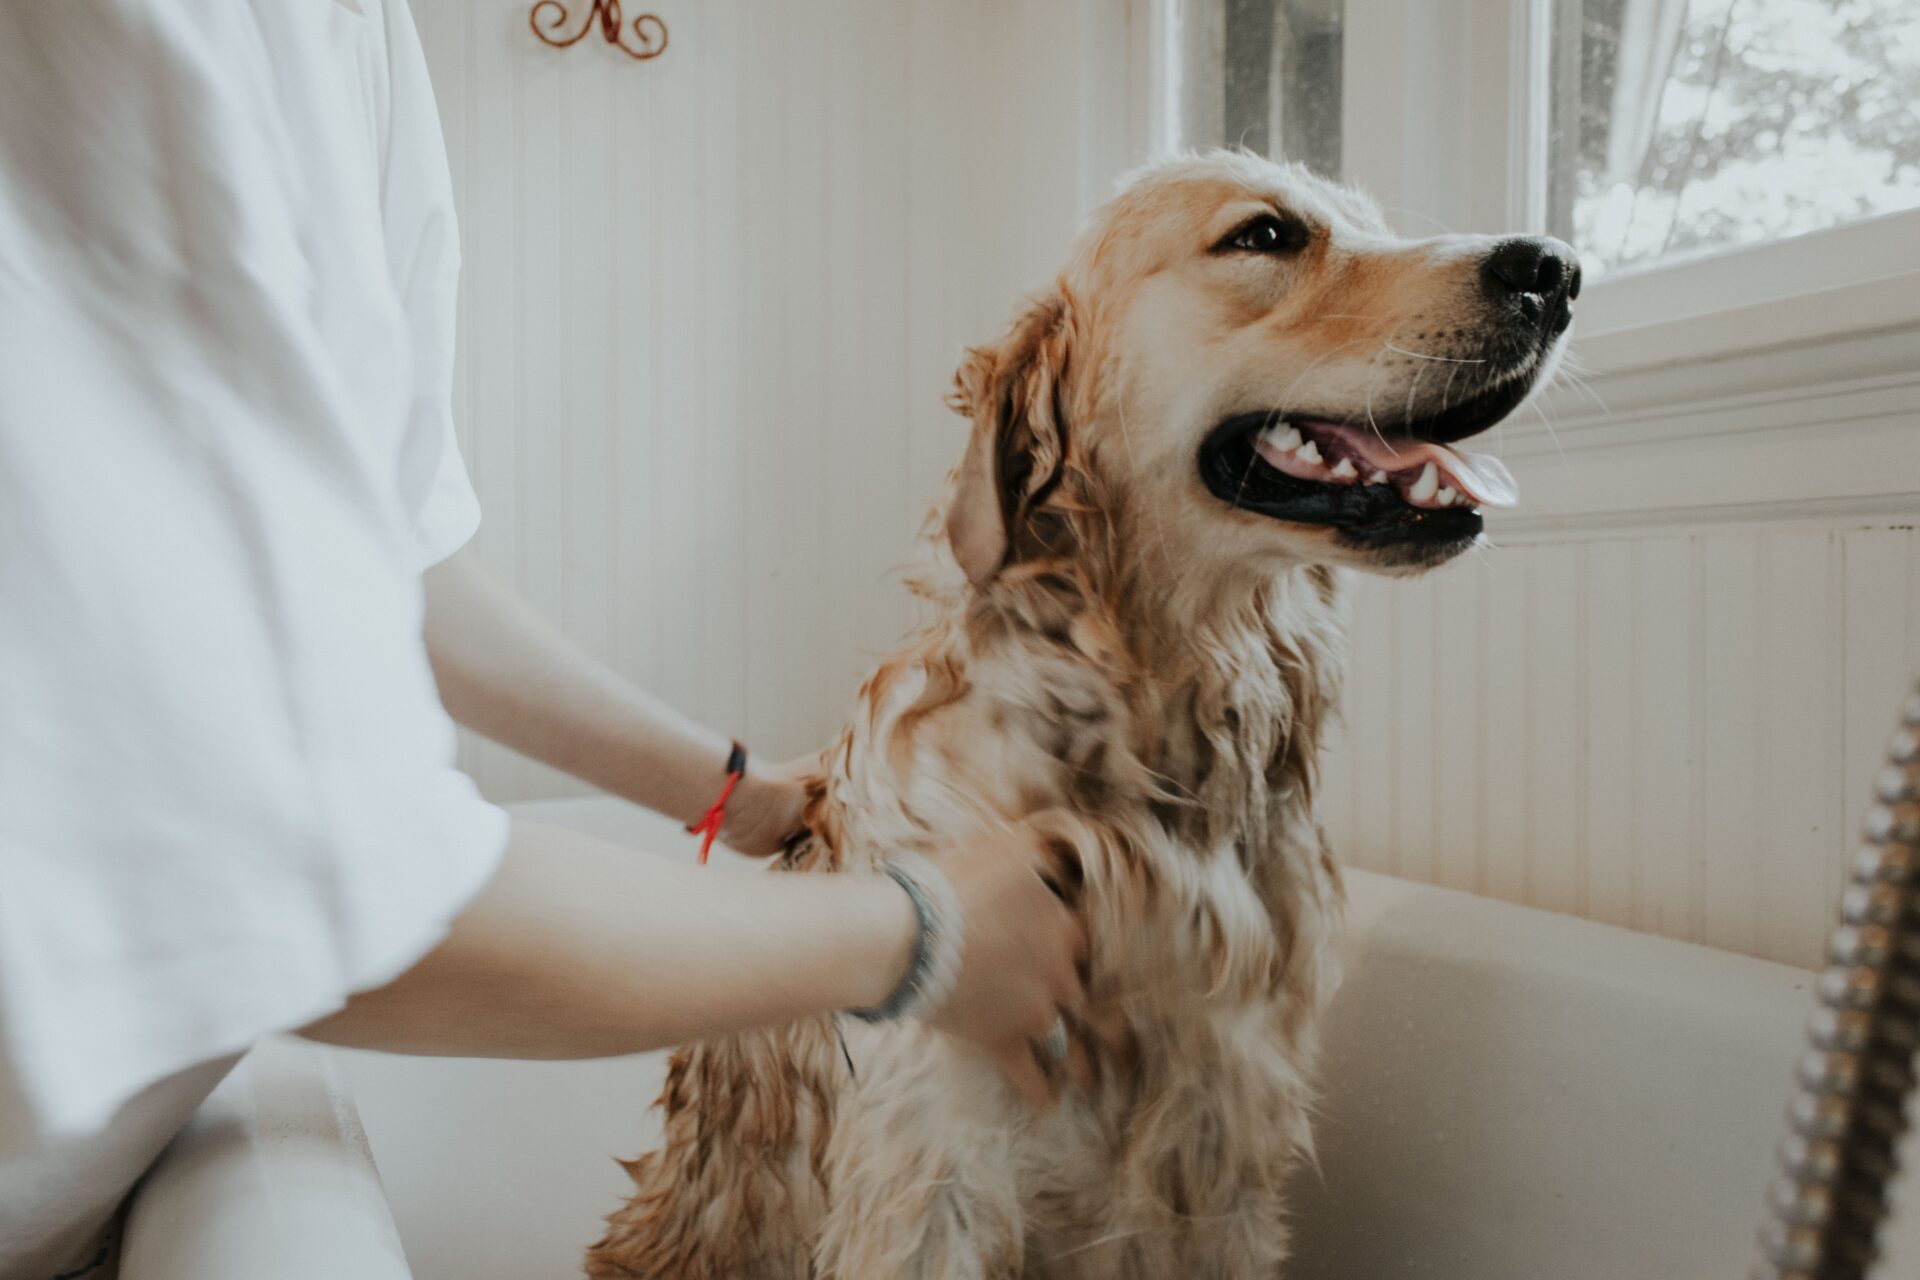 Taking Care of Your Dog’s Fur: What Should You Buy for Proper Care?